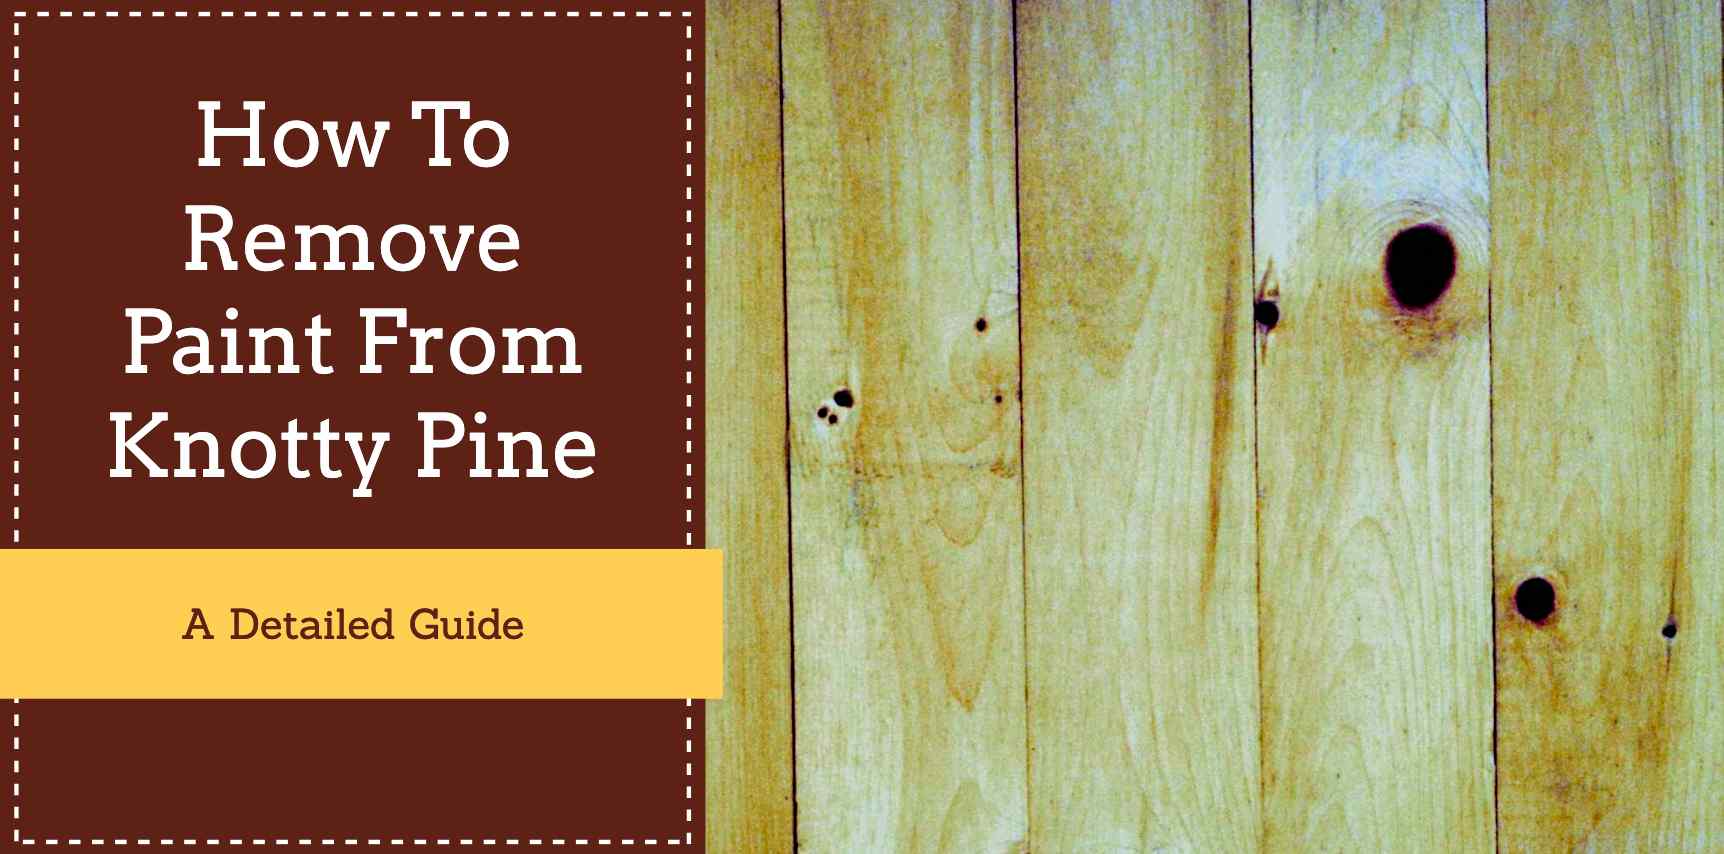 How to remove paint from knotty pine